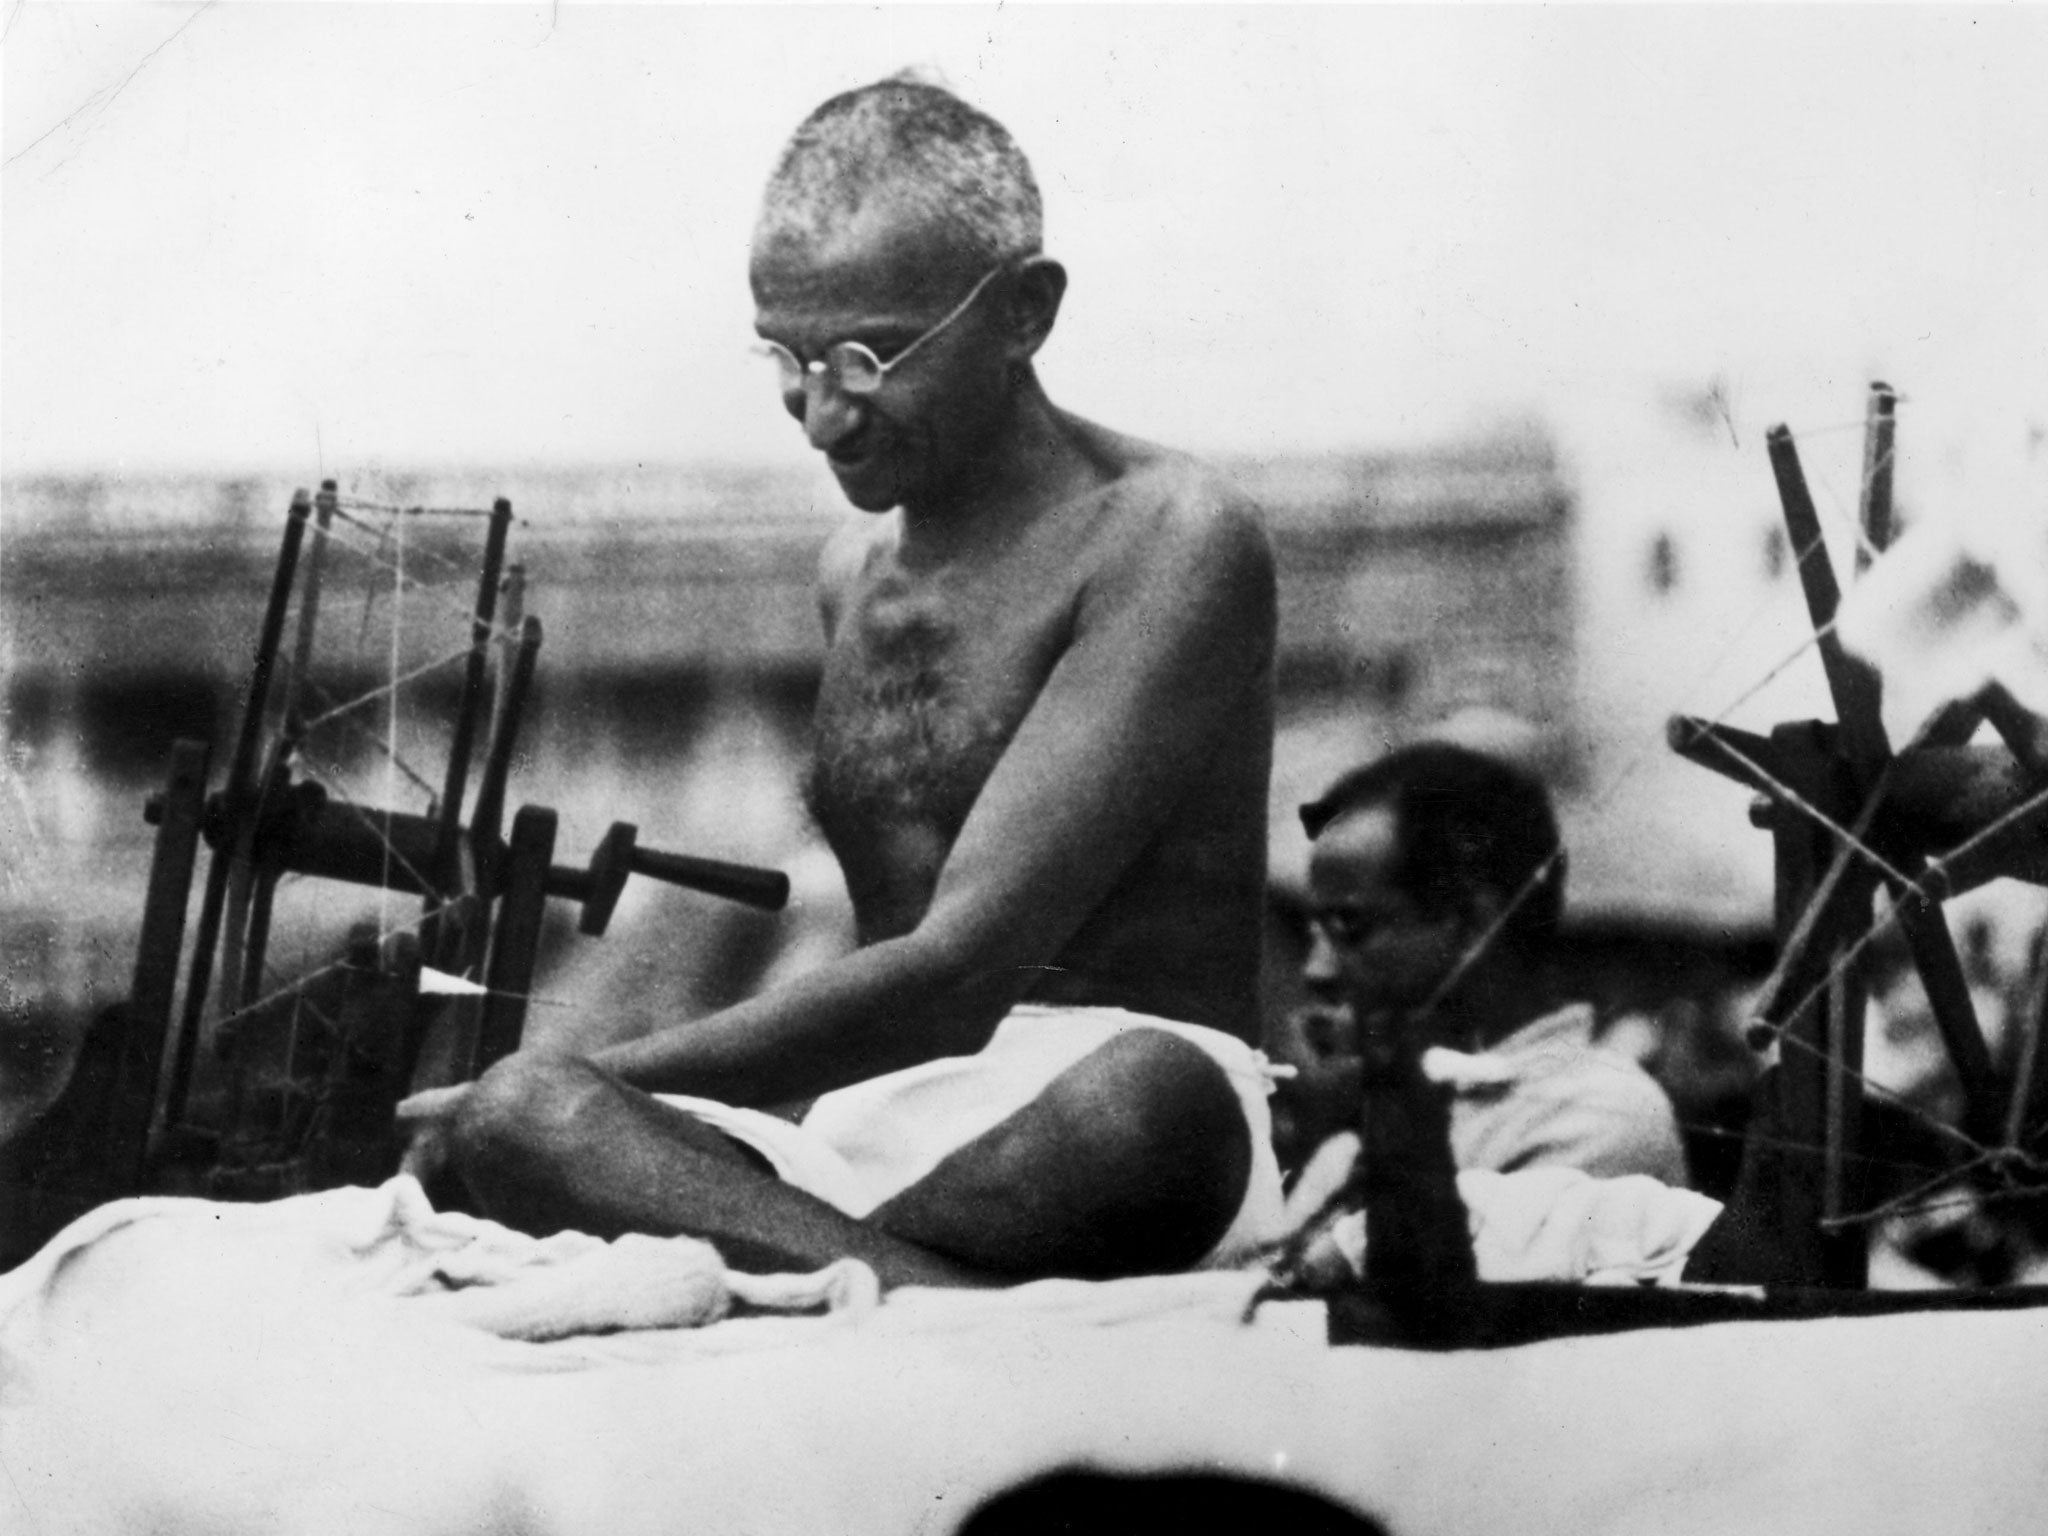 Gandhi spins his clothing, 1925